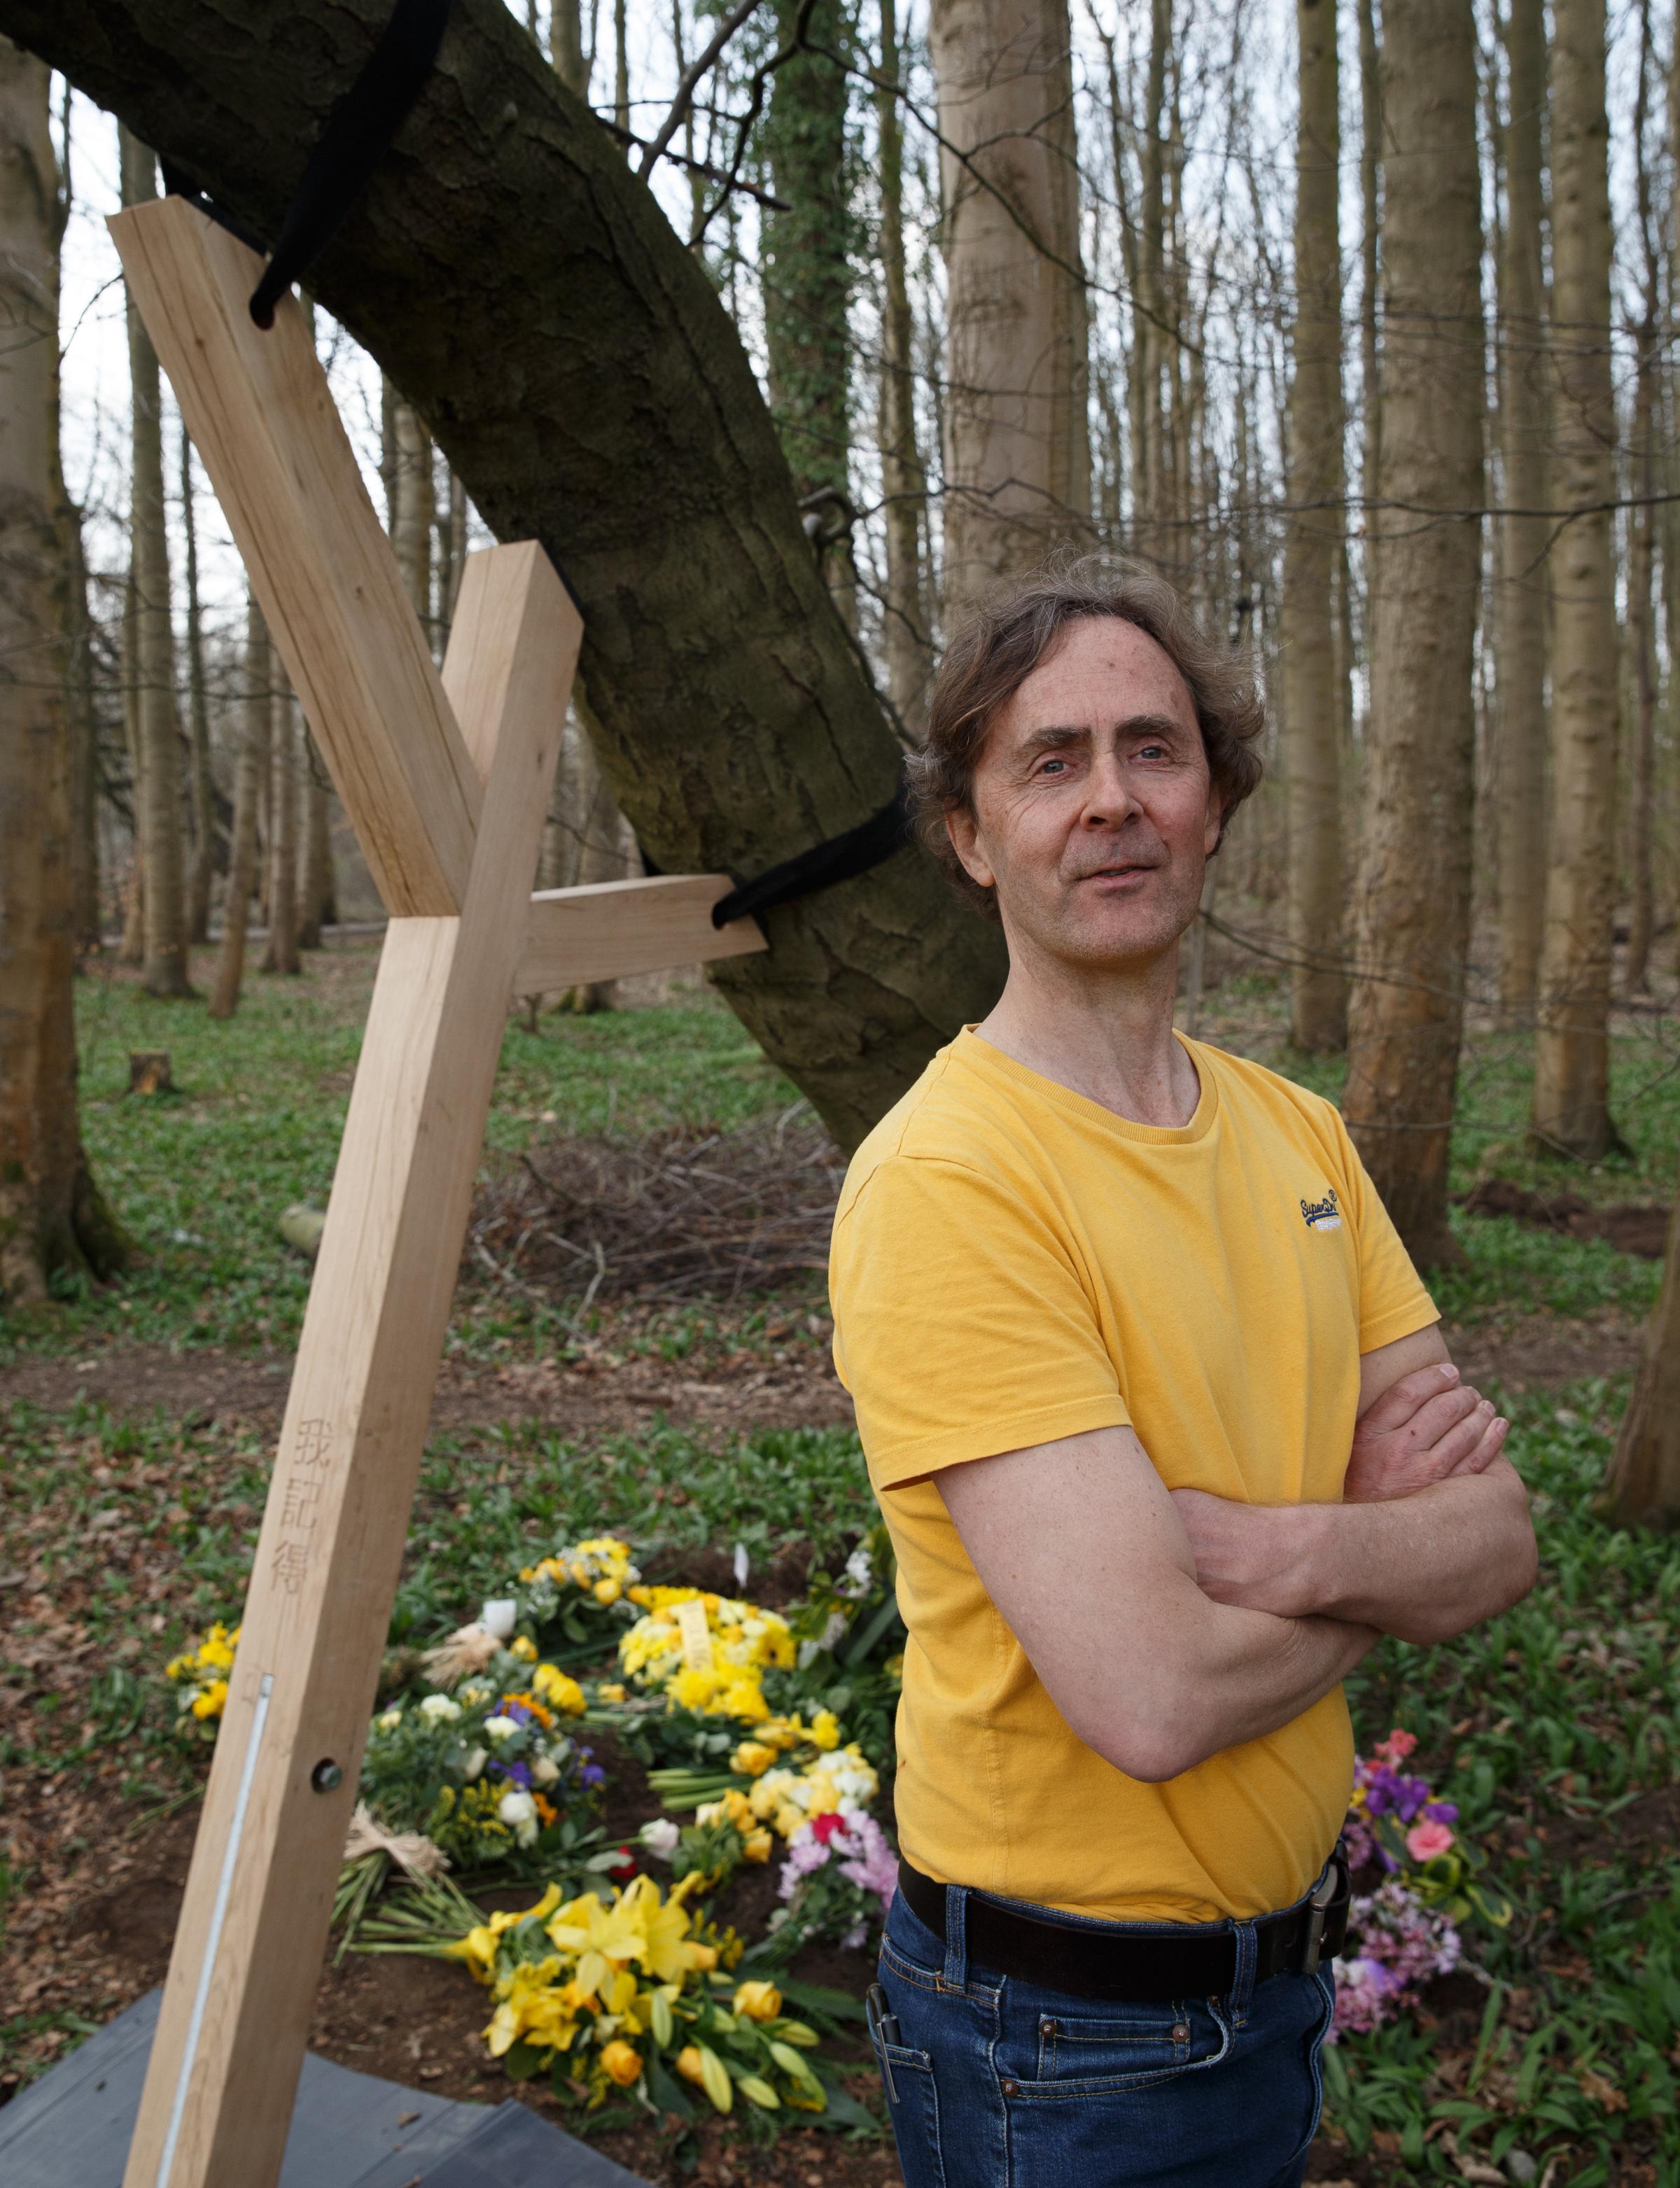 Artist Alec Finlay installing the first of the Covid memorial tree supports in Pollok Country Park. Photograph by Colin Mearns.